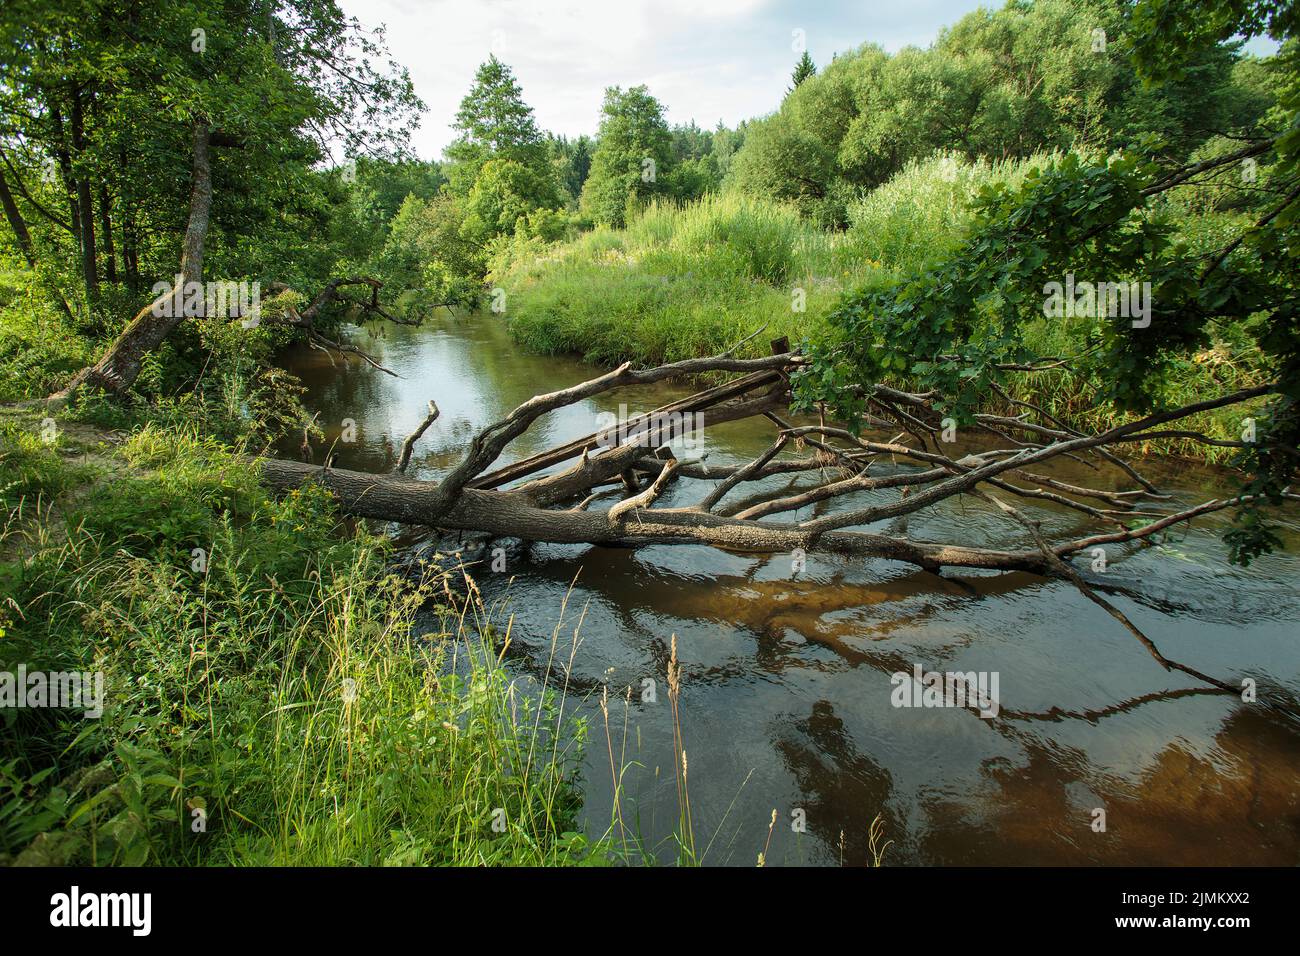 Nature of Belarus, summer landscape with a small river Stock Photo